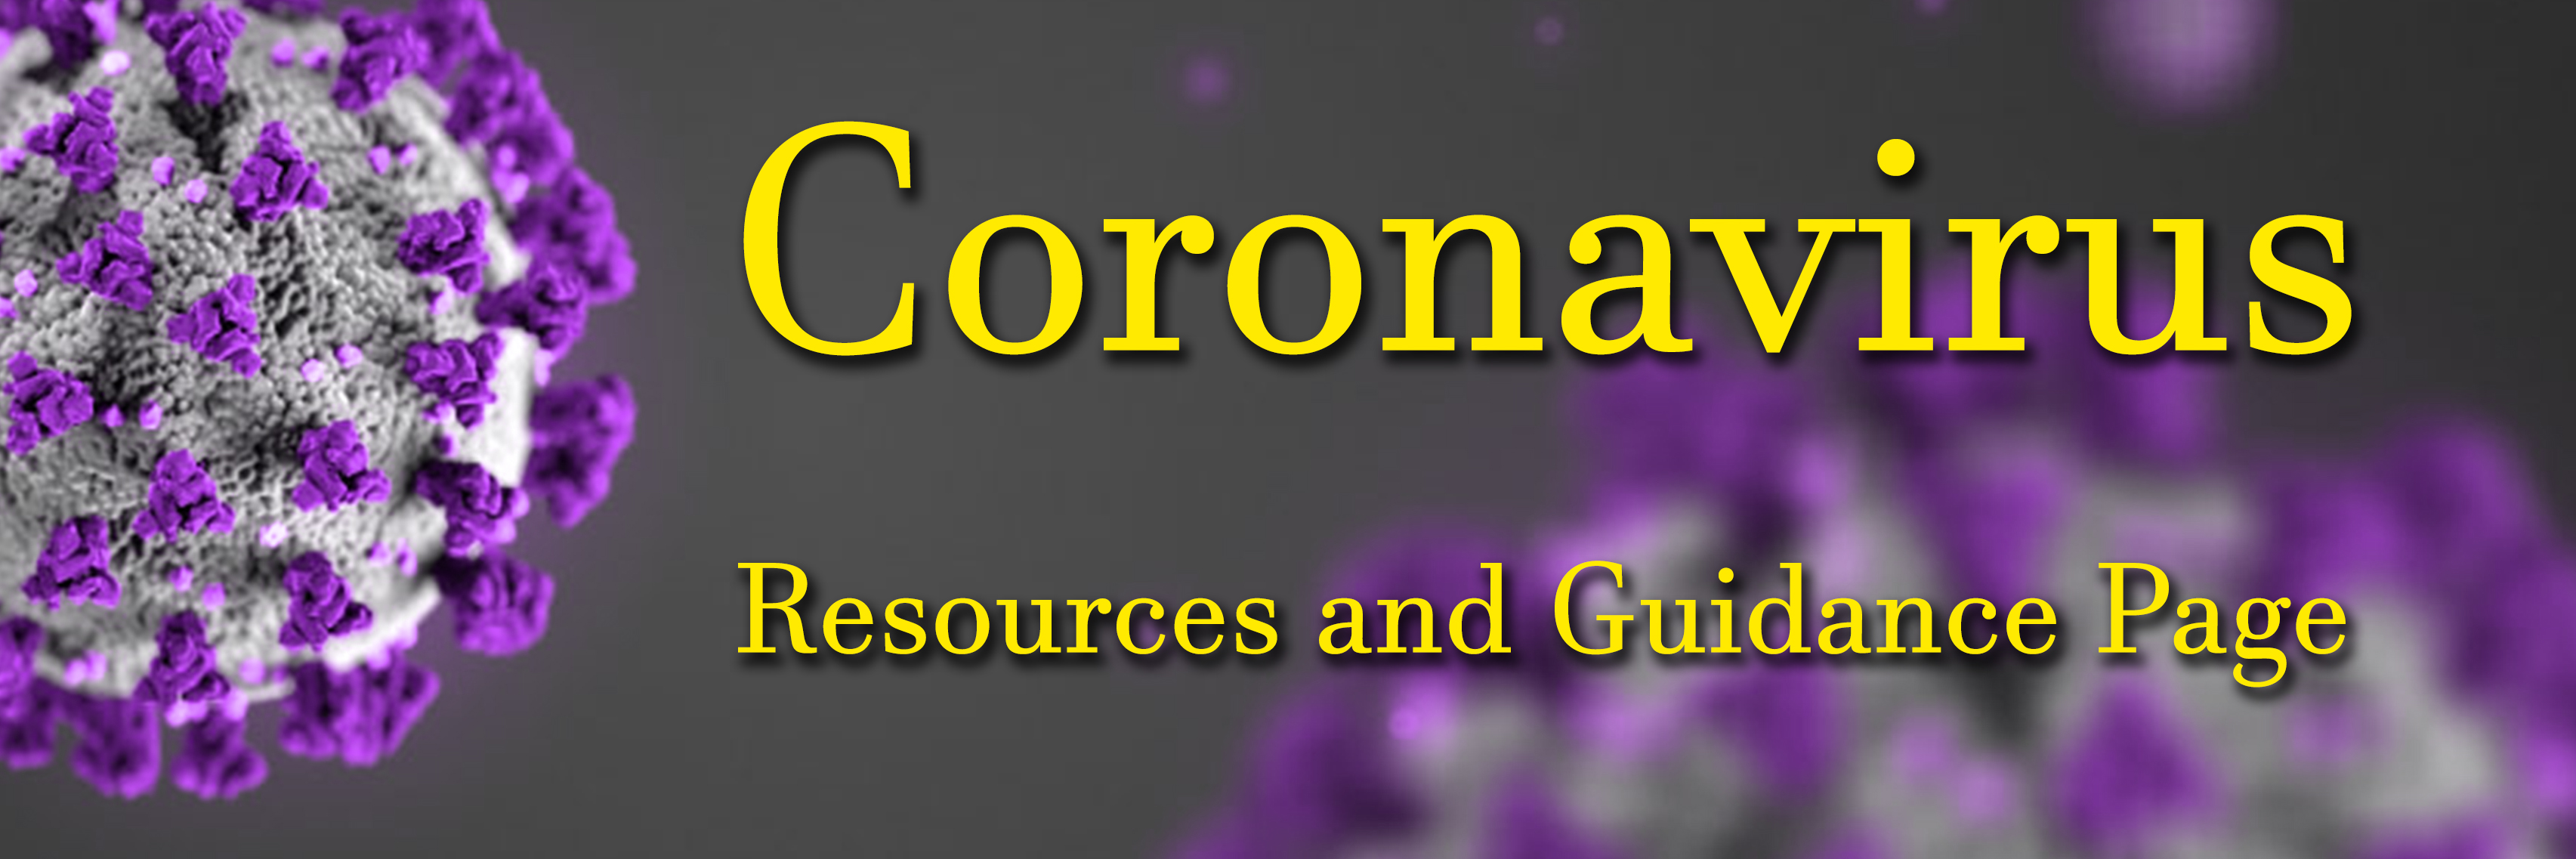 Corona virus Resources and Guidance banner